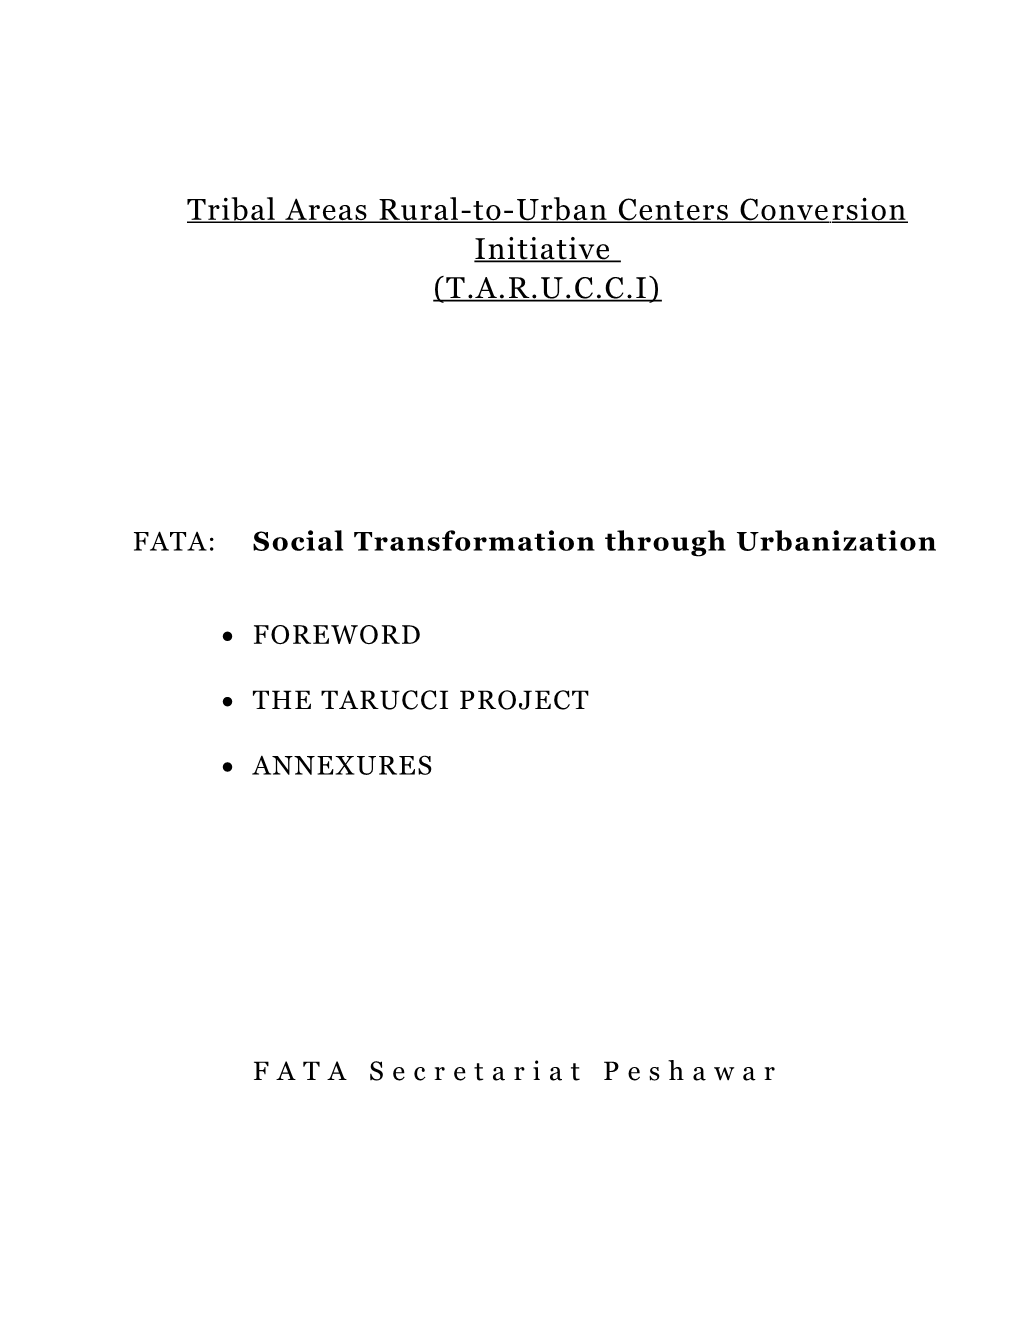 Tribal Areas Rural-To-Urban Centers Conversion Initiative